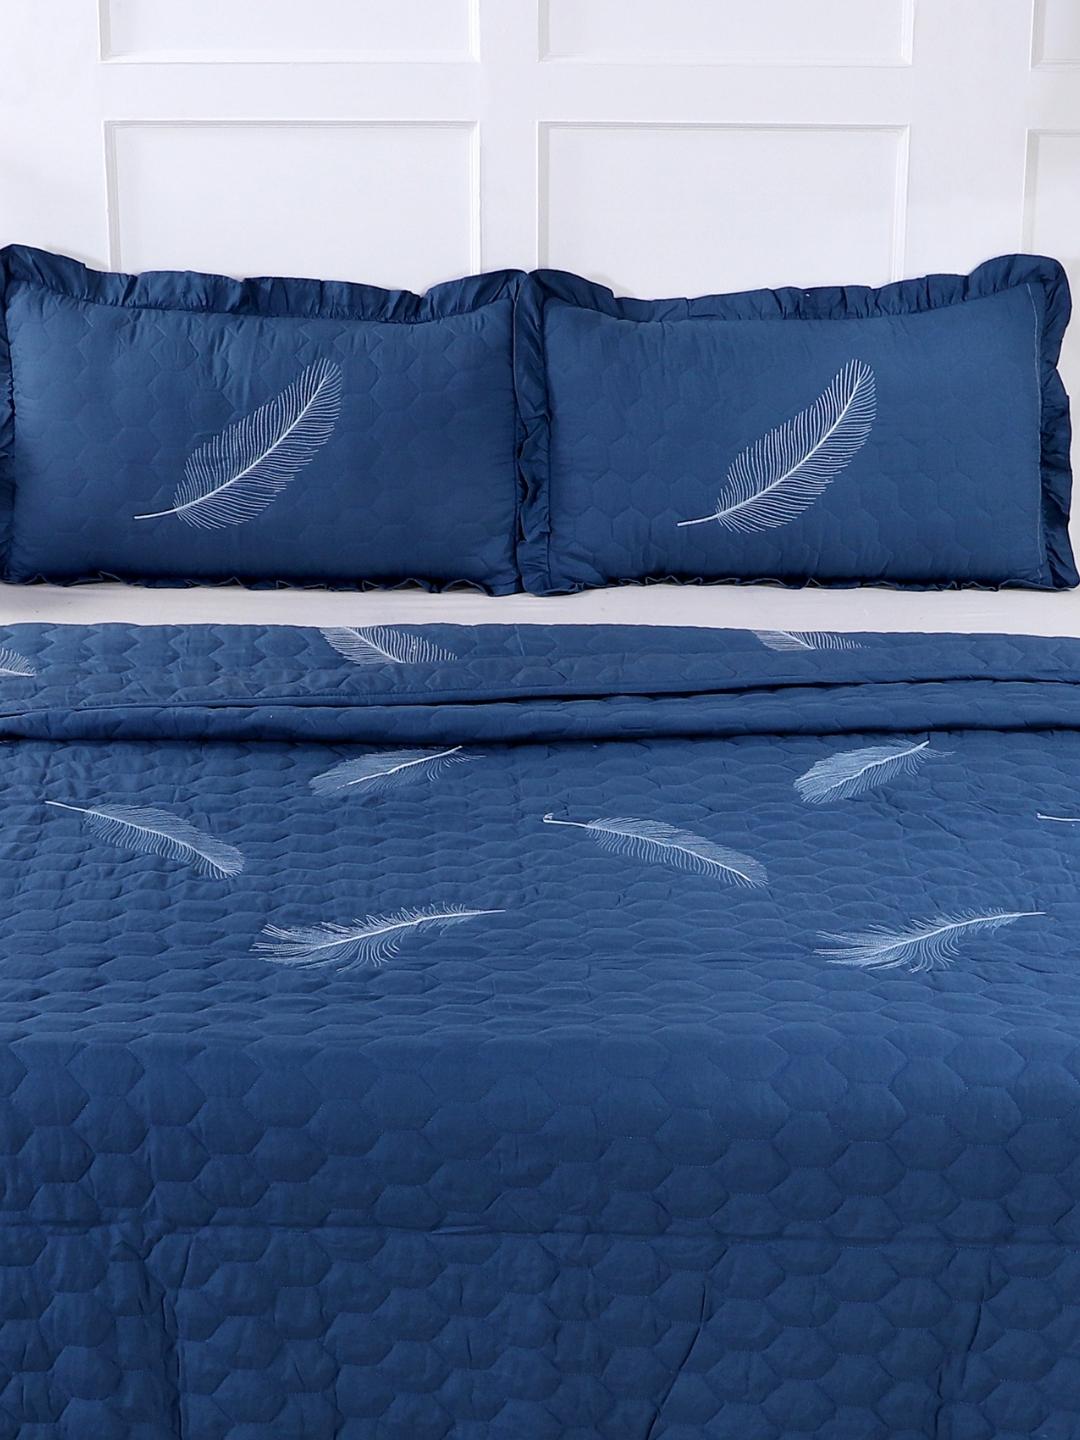 Double Bed Embroidered and Quilted Bedcover Set-Navy Blue